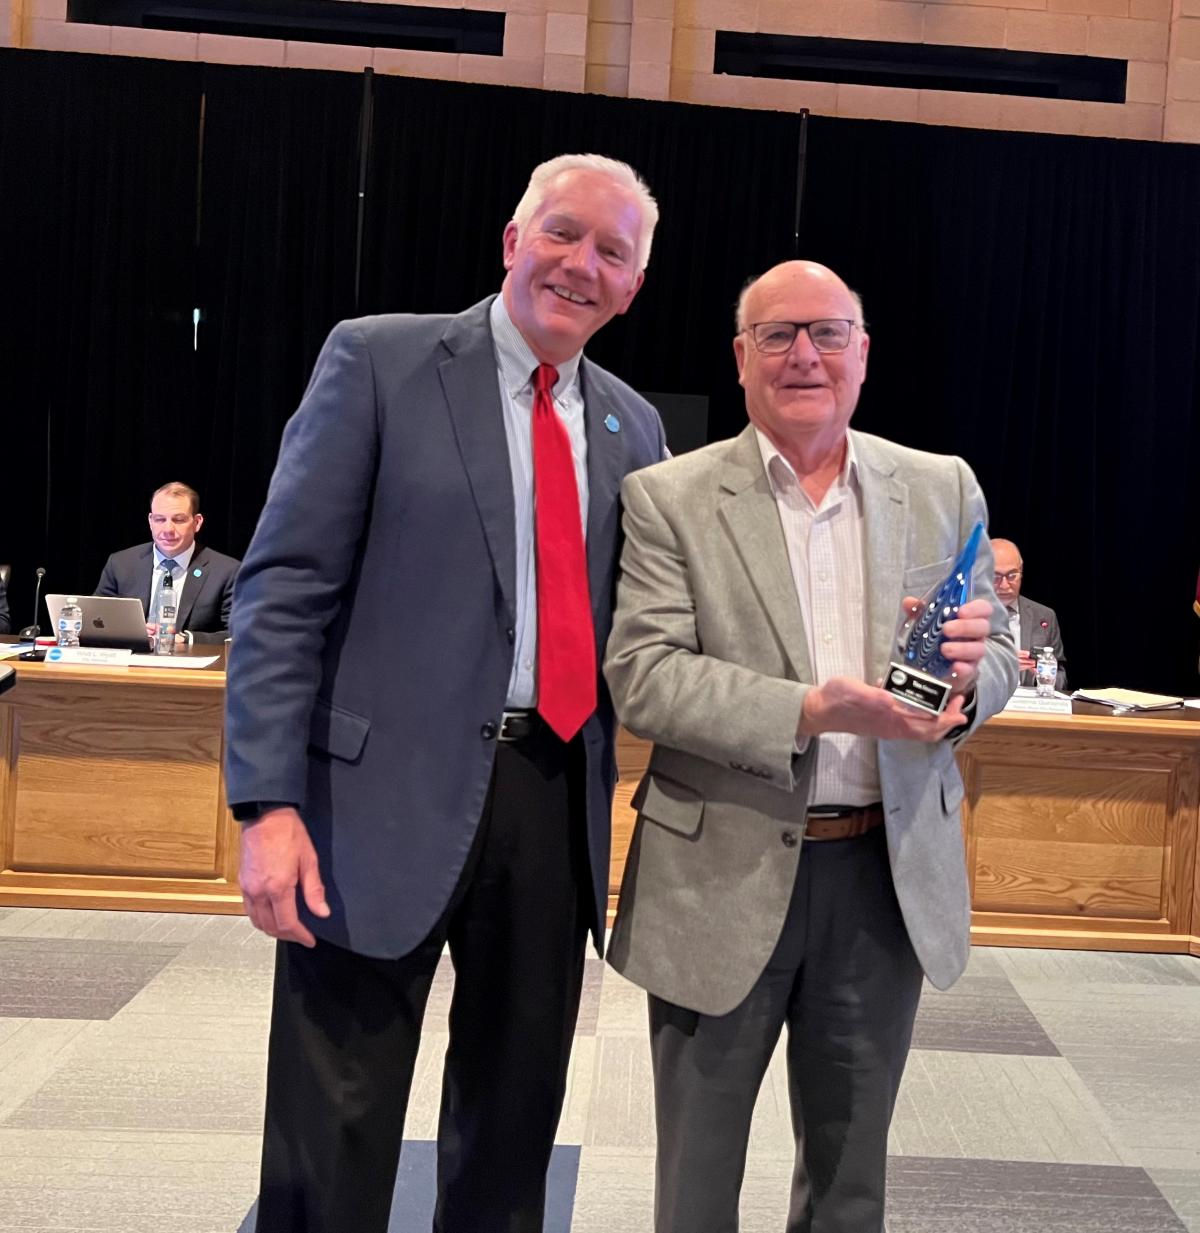 Tom Souers Recognized by Addison Mayor Bruce Arfsten